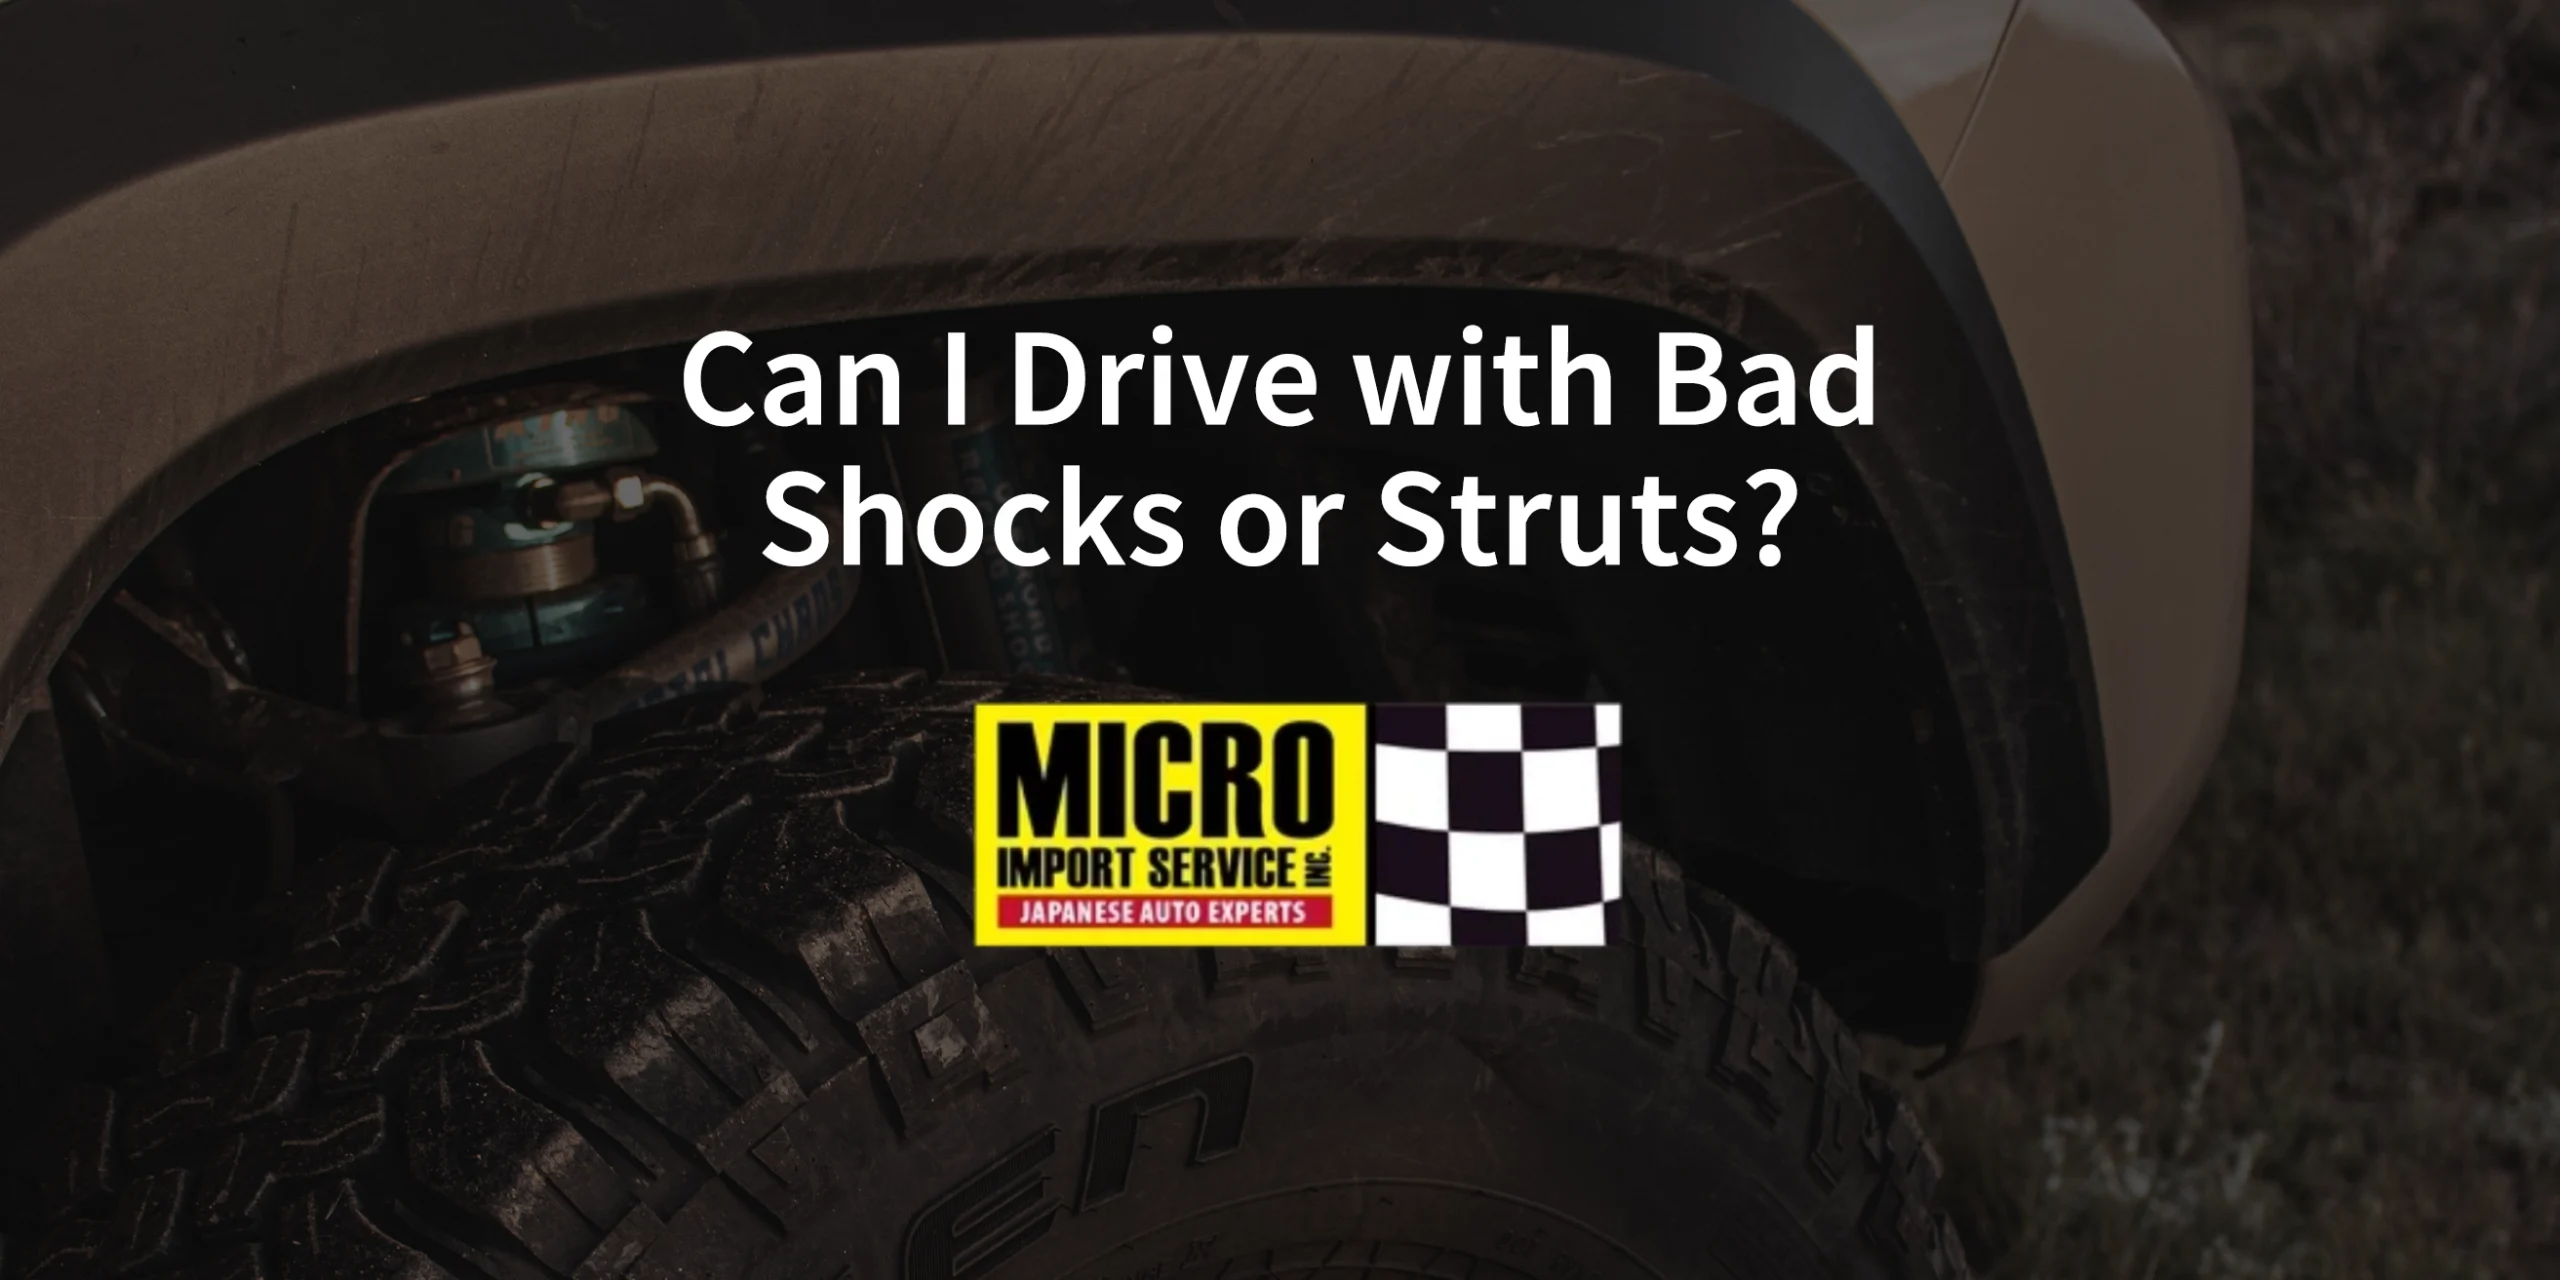 Can I Drive with Bad Shocks or Struts?